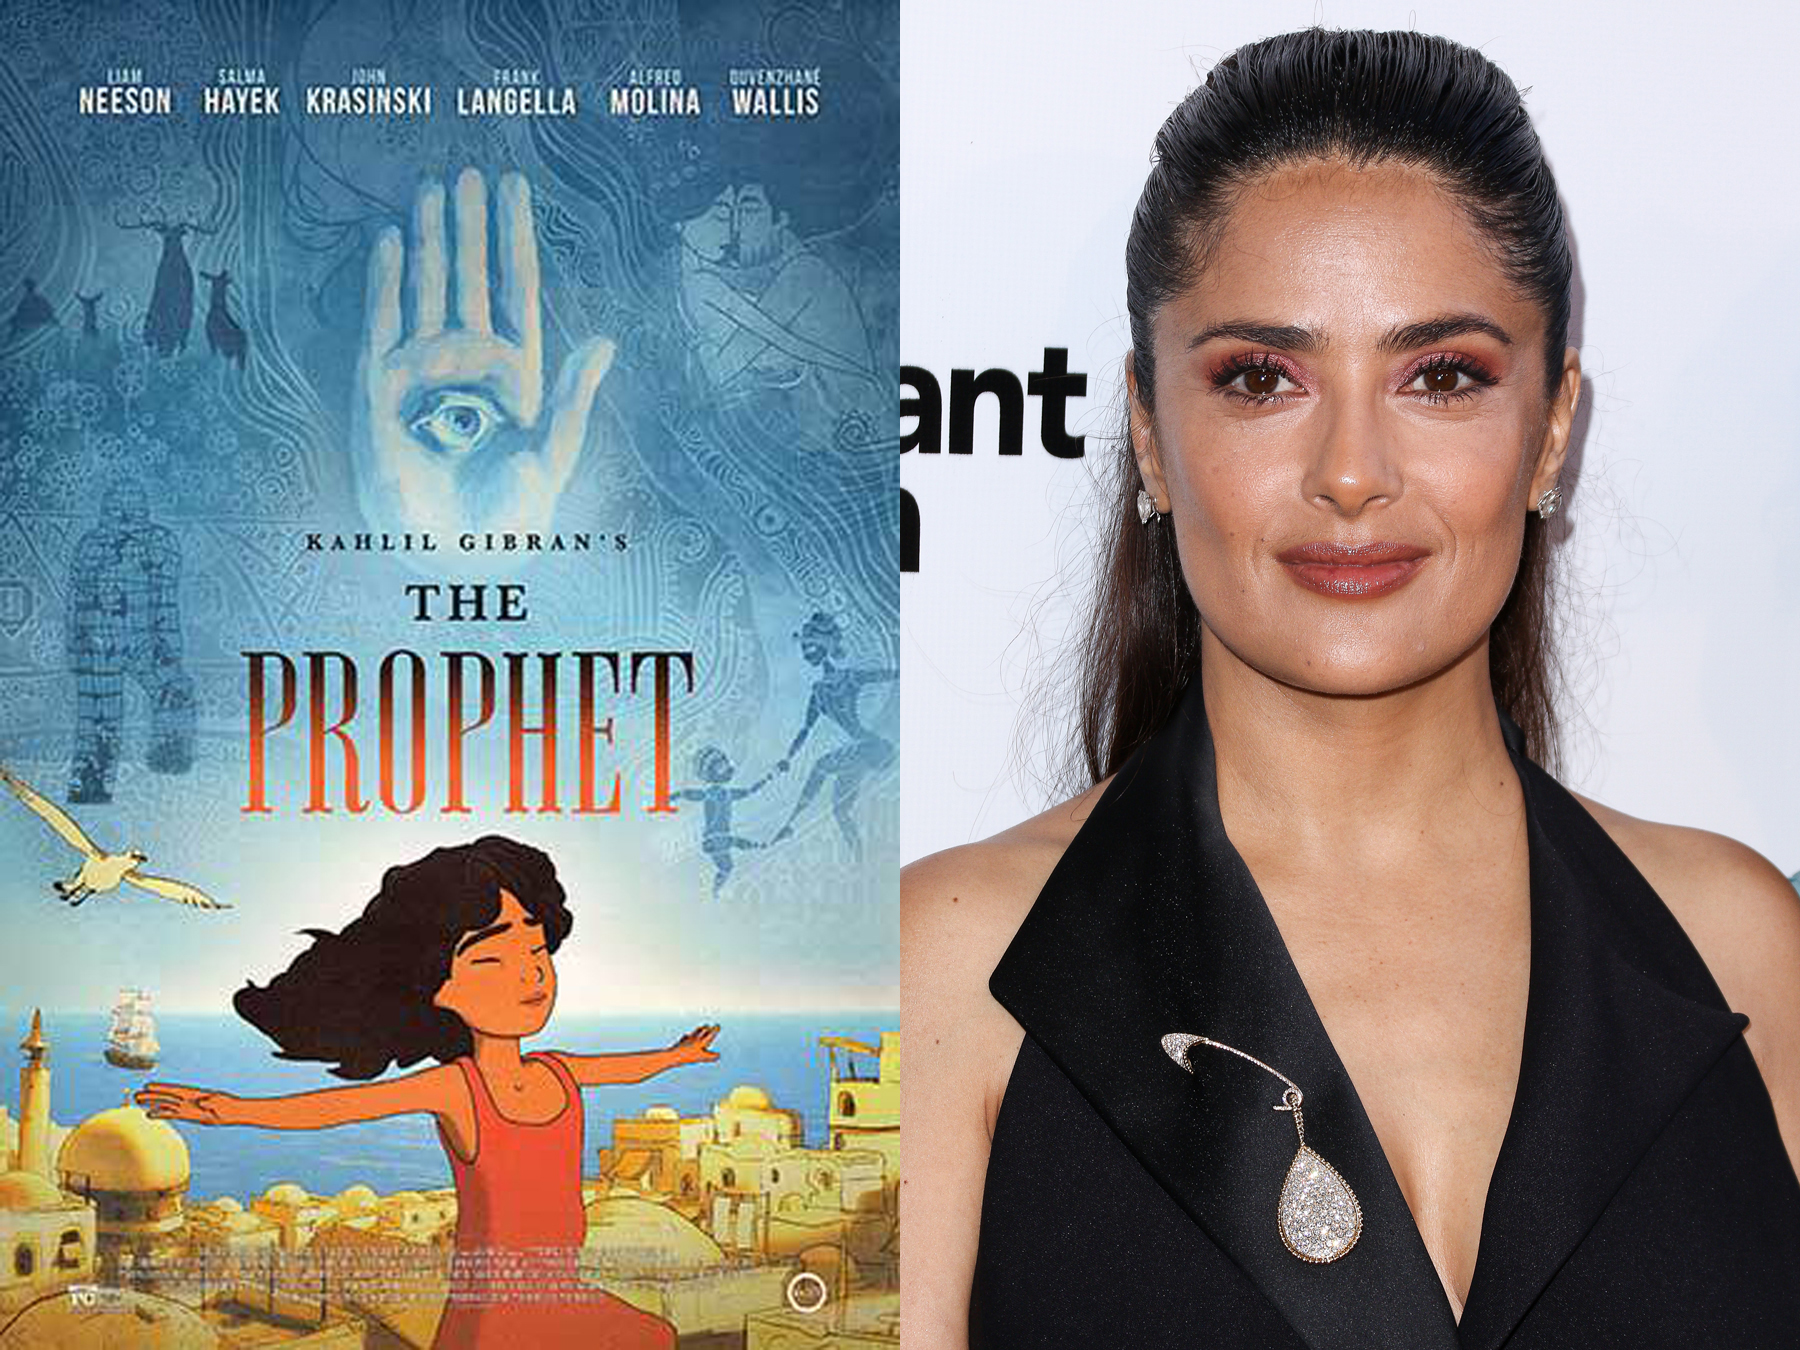 Salma Hayek Pinault attends the LA Special Screening of "Kahlil Gibran's The Prophet" held at LACMA's Bing Theatre on July 29, 2015, in Los Angeles. (John Salangsang—Invision/AP)